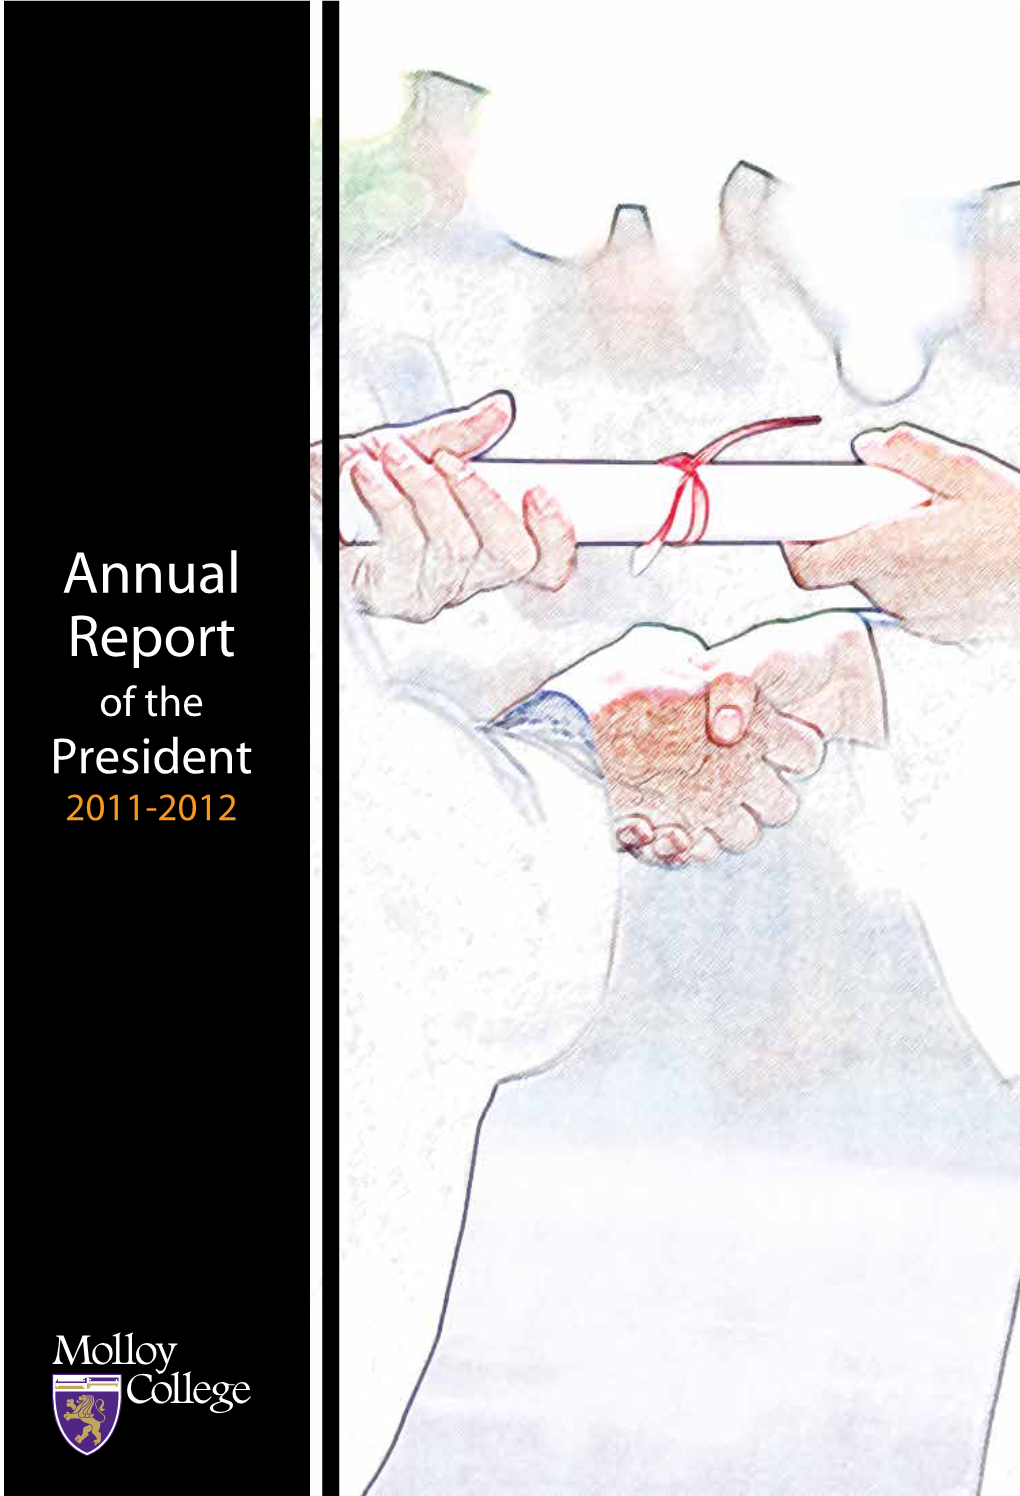 Annual Report of the President 2011-2012 Mission Statement: Molloy